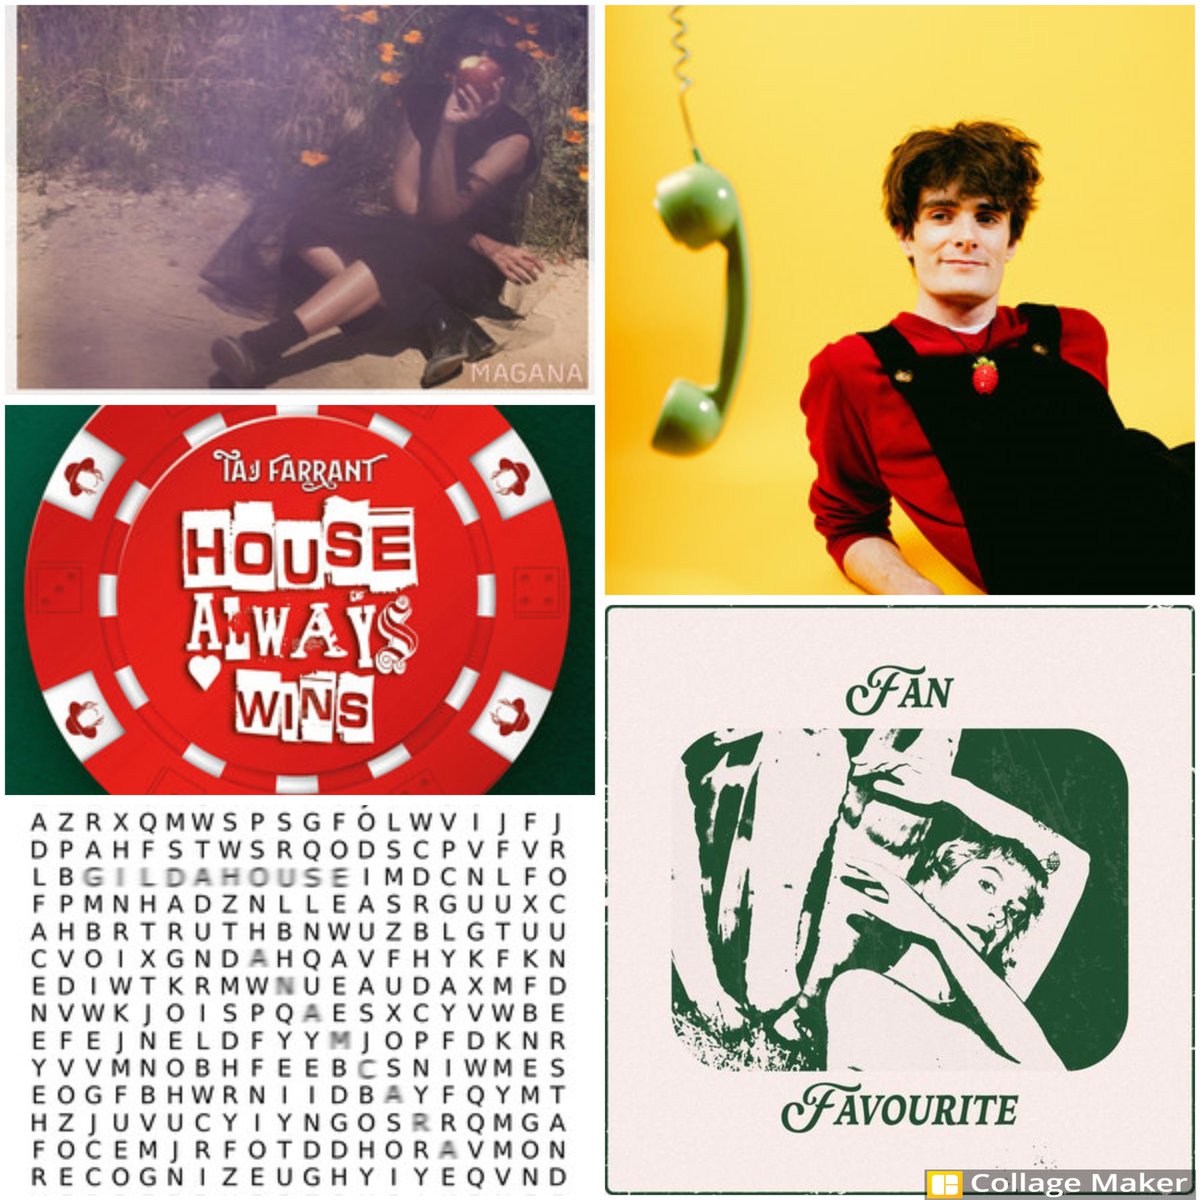 5 more tracks are featured today so have a listen to the latest releases from Gilda House (@gildahousemusic), Bess Atwell (@BessAtwell), Taj Farrant (@tajfarrant), Magana (@maganarama) and Charlie Bennett (#charliebennett) - link as always in our bio!